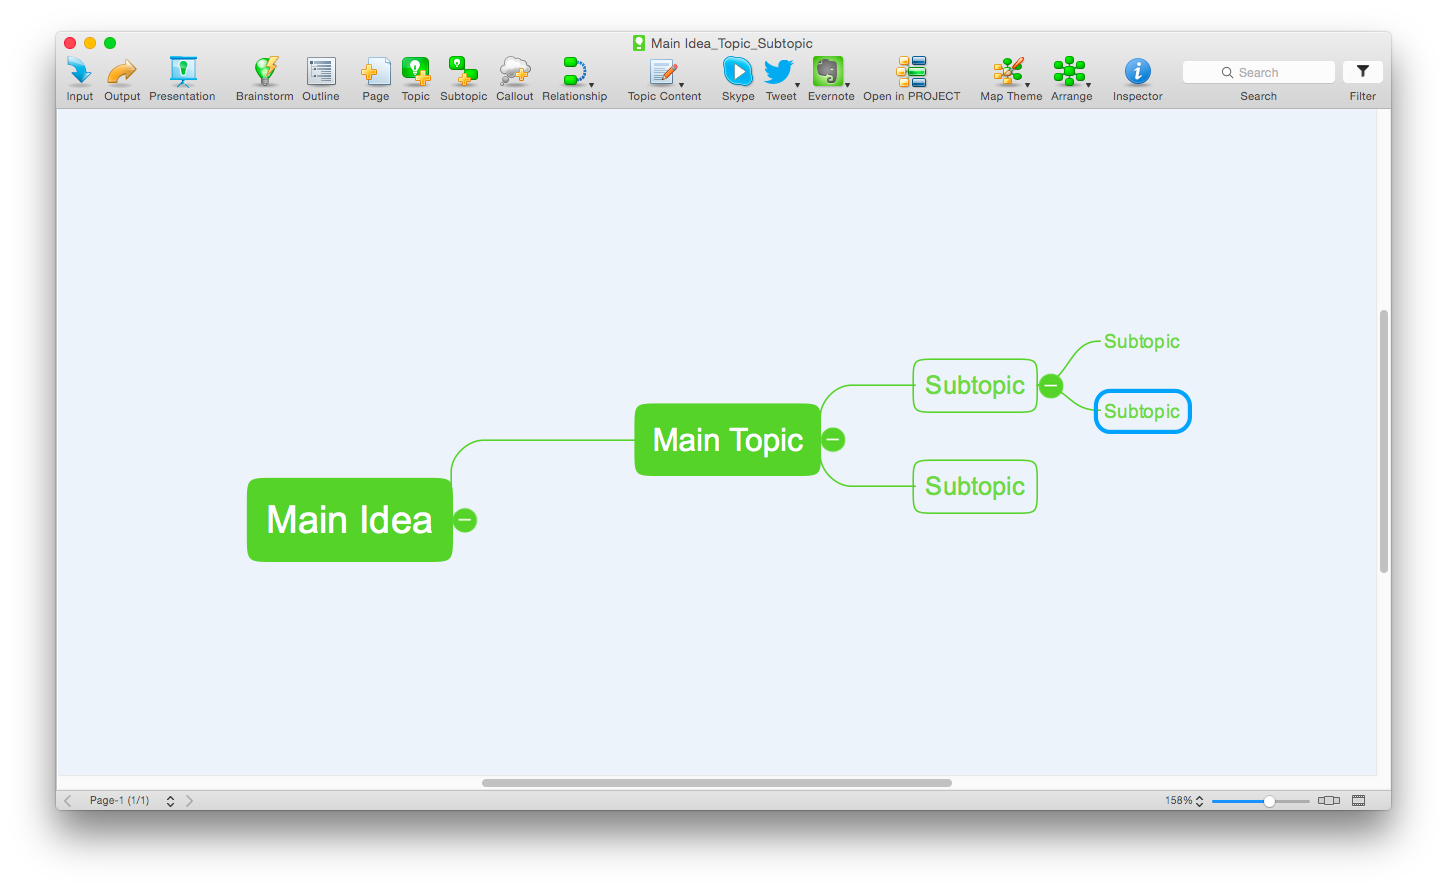 Concept Draw Office 10.0.0.0 + MINDMAP 15.0.0.275 download the last version for ios